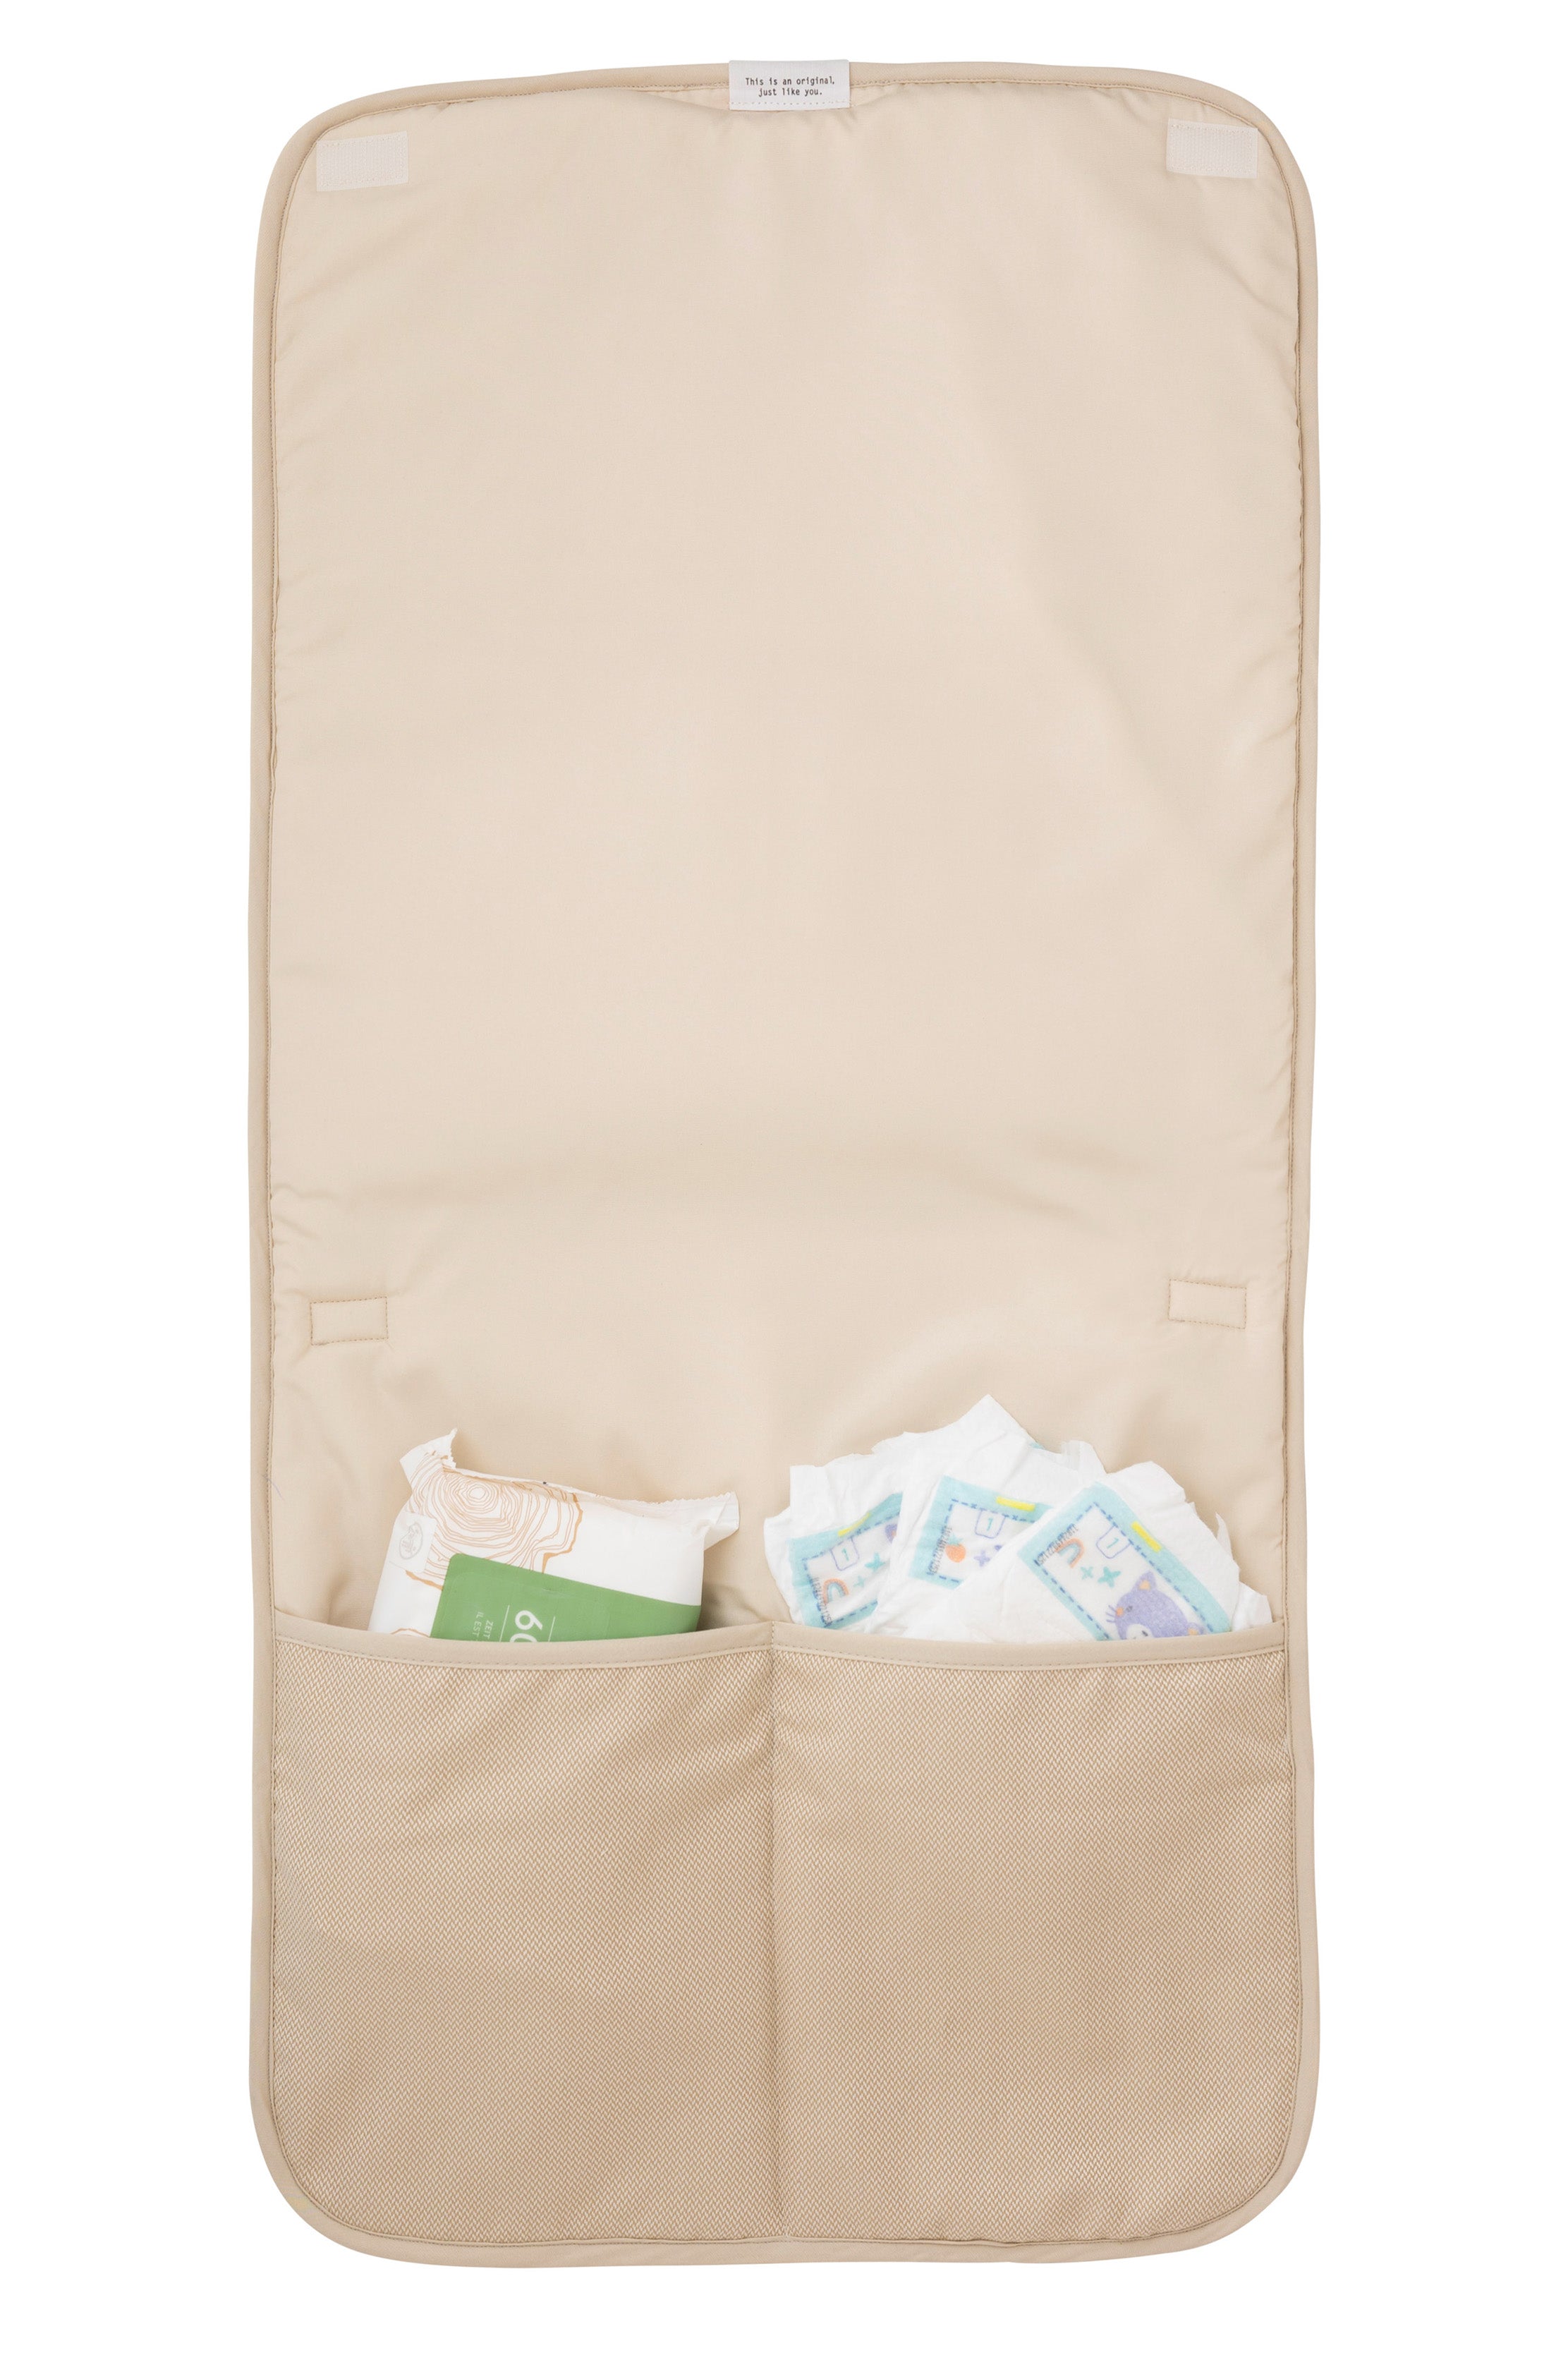 sandiia® mobile changing mat with pockets